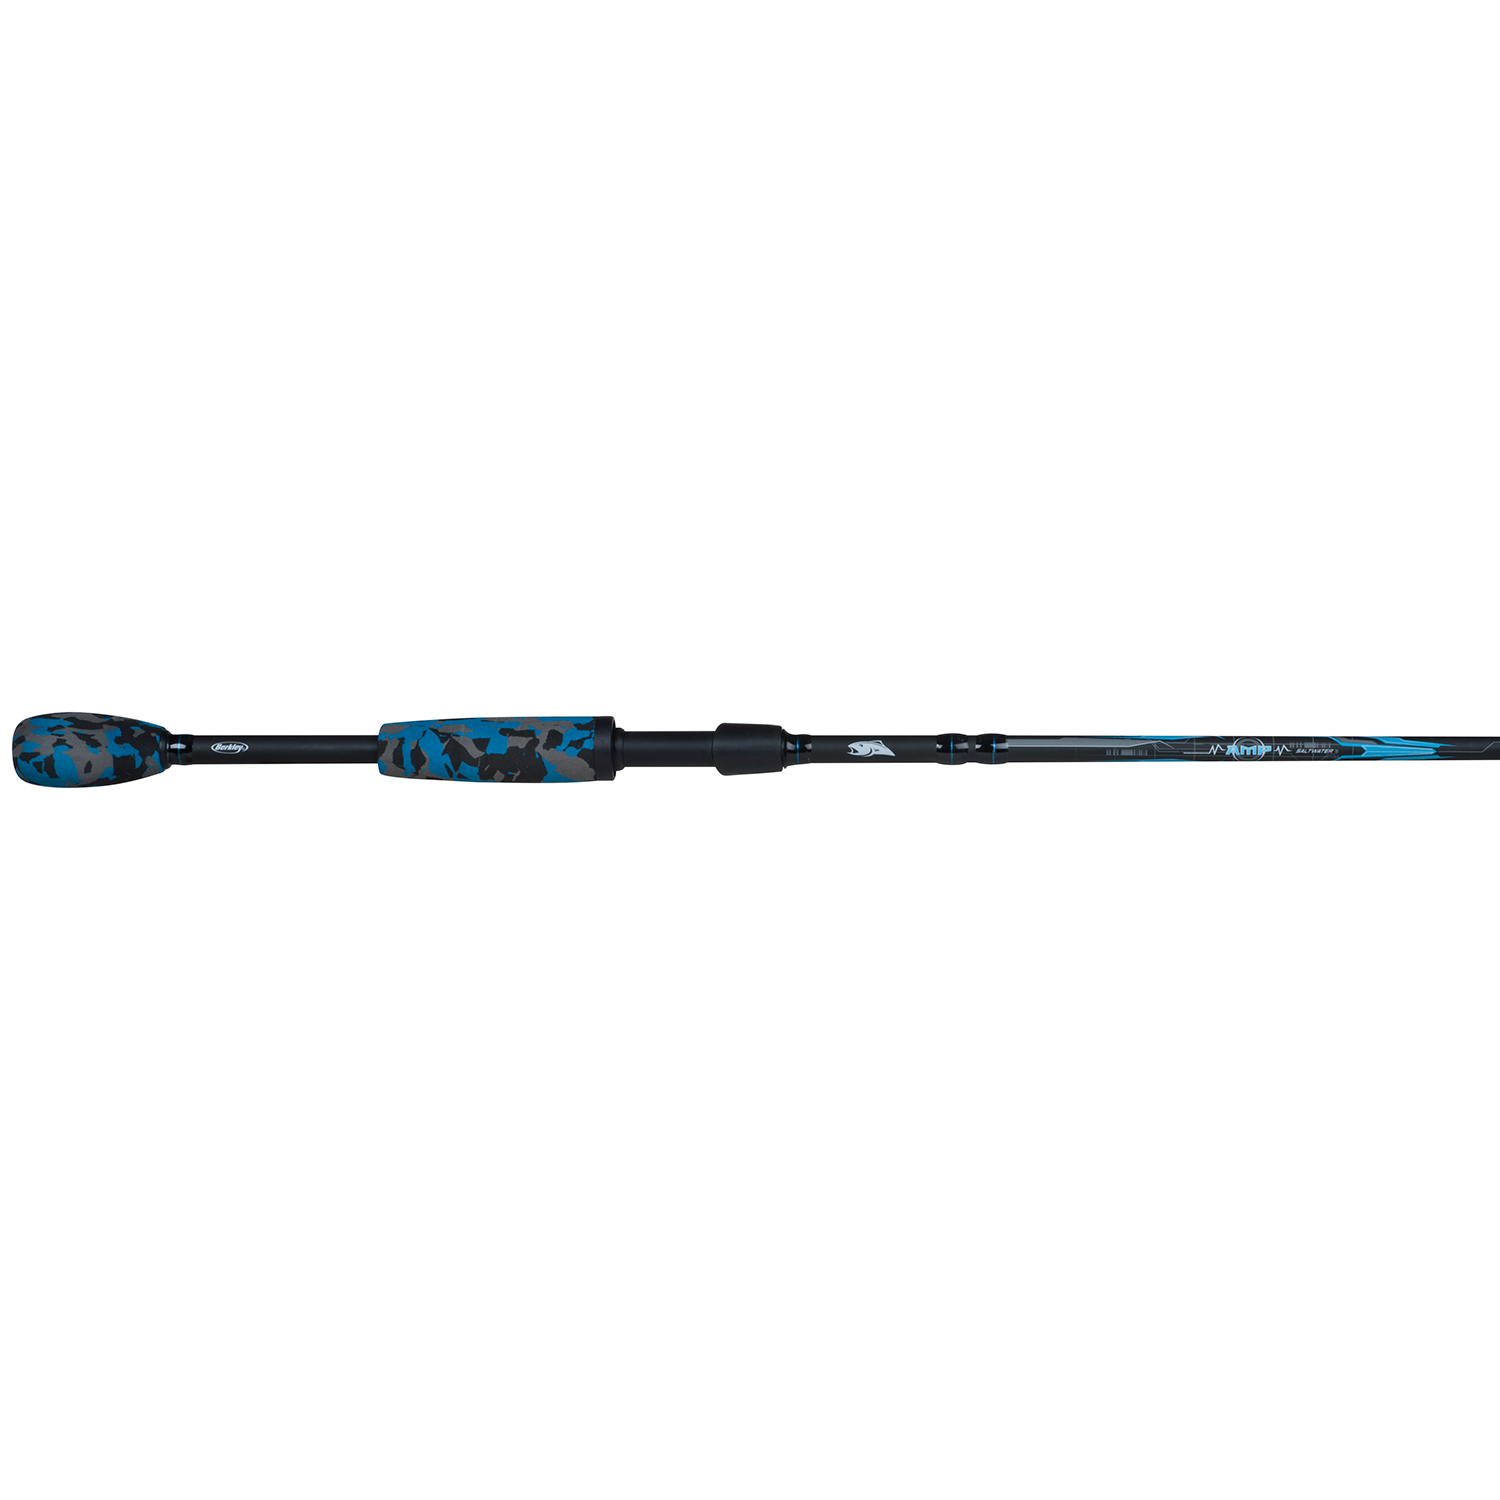 AMP™ Saltwater Spinning Rods